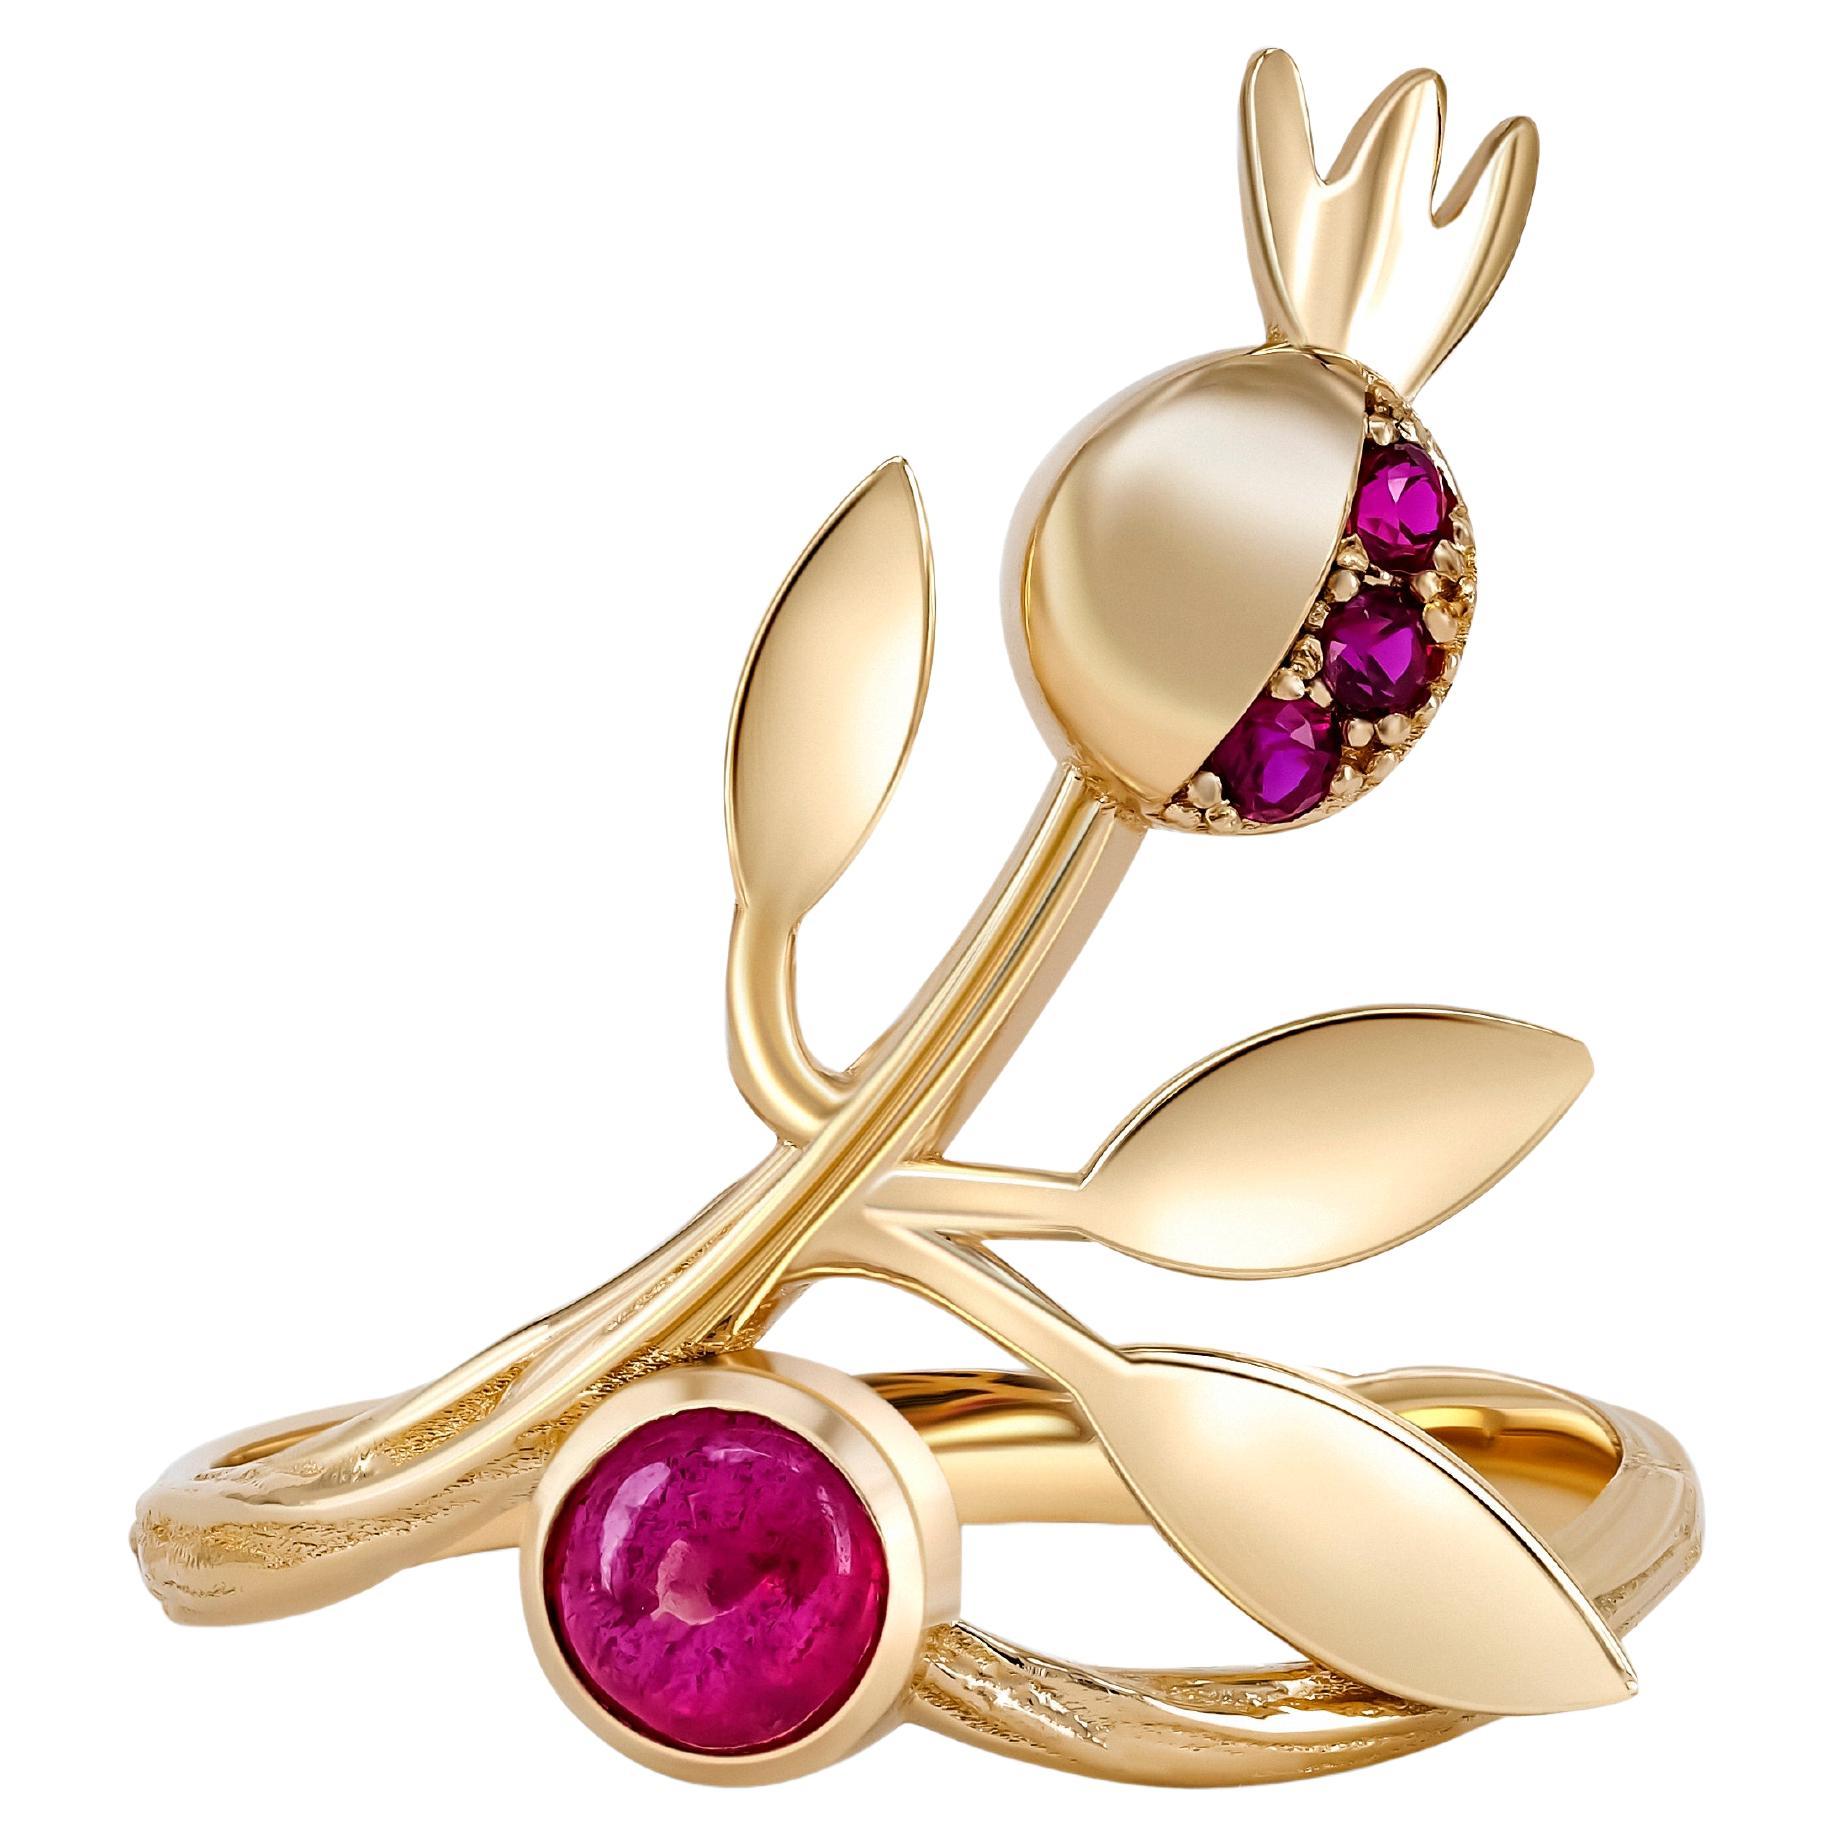 For Sale:  14 karat Gold Ring with Ruby, Sapphires. Pomegranate ring. July birthstone ring!